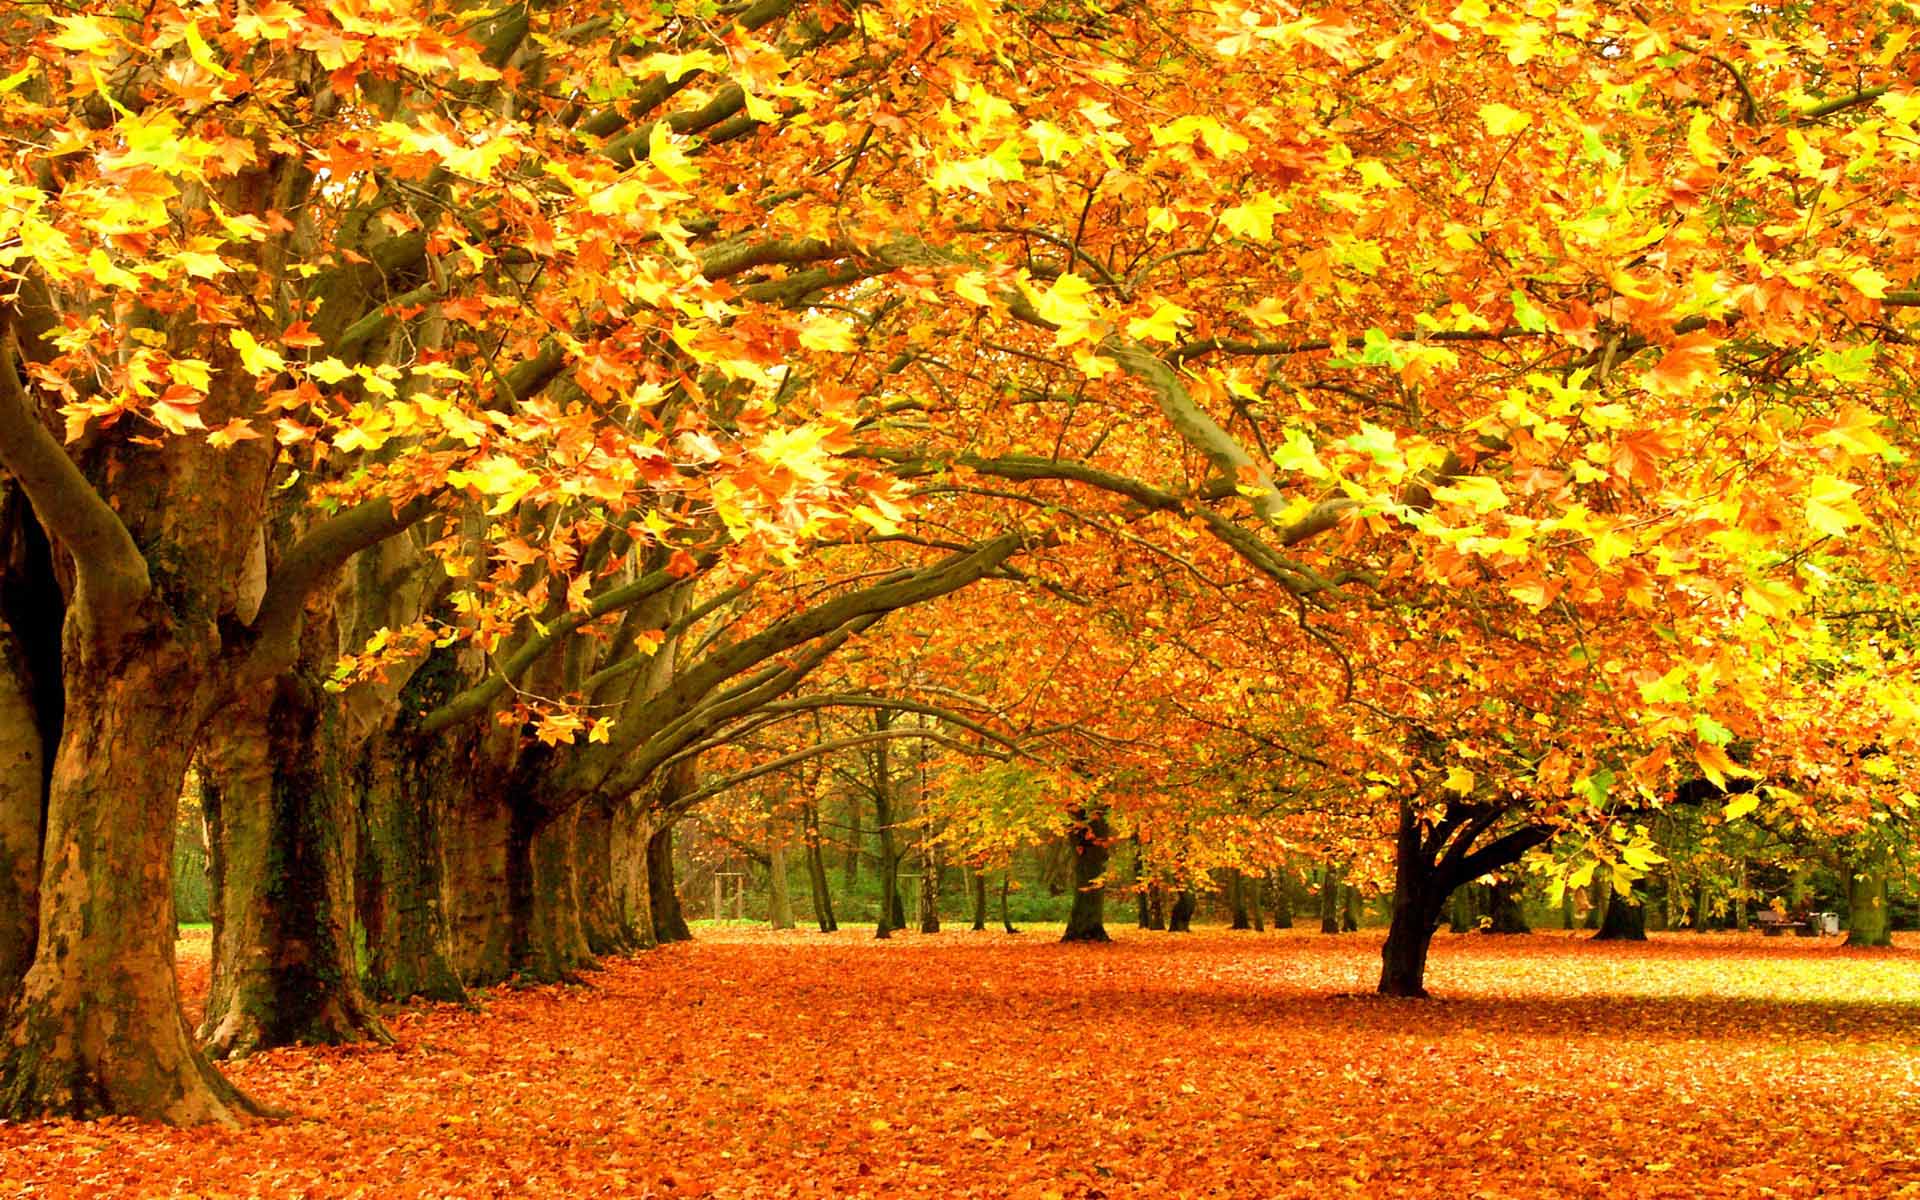 Background Images Fall